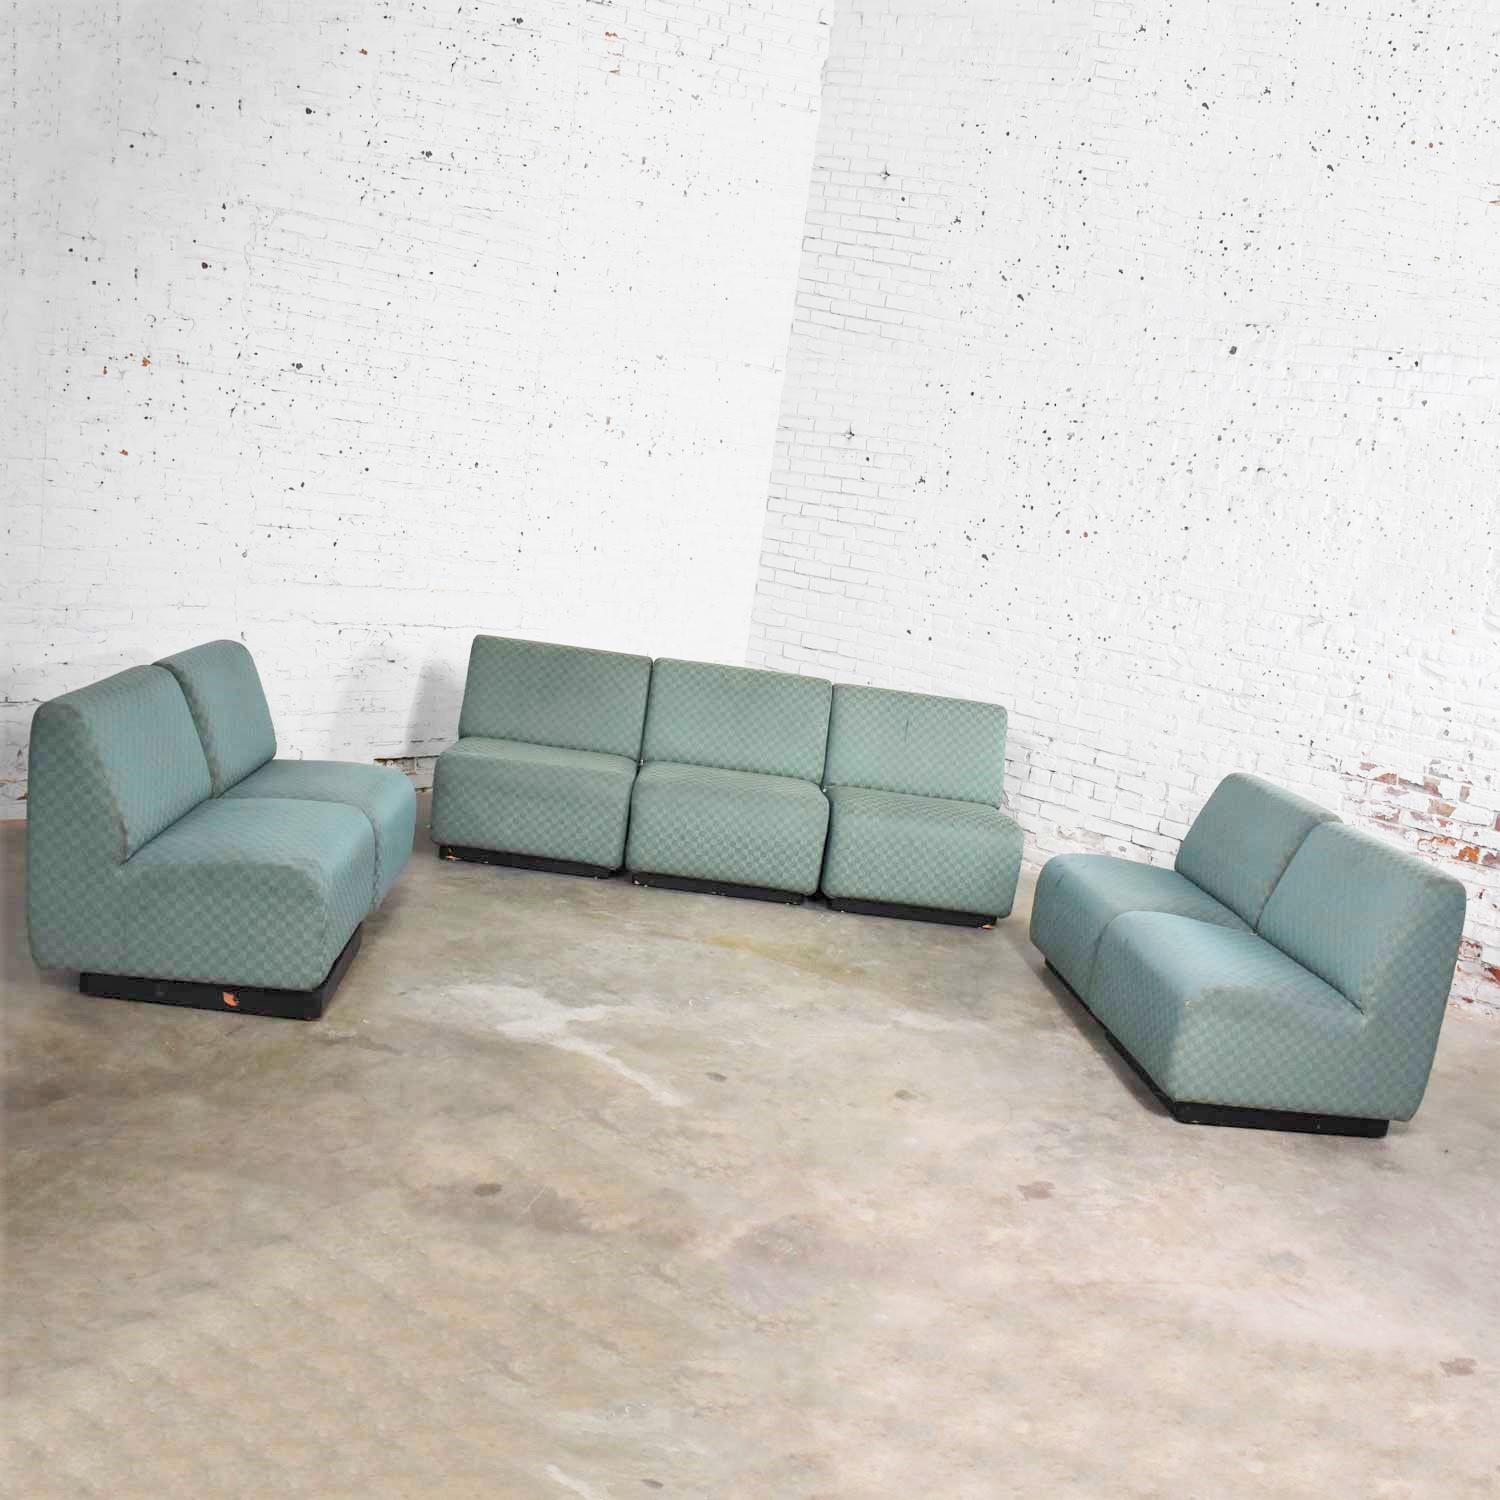 20ième siècle August Inc Modernity Modular Sectional Sofa Straight & Wedge Pieces Style Chadwick en vente